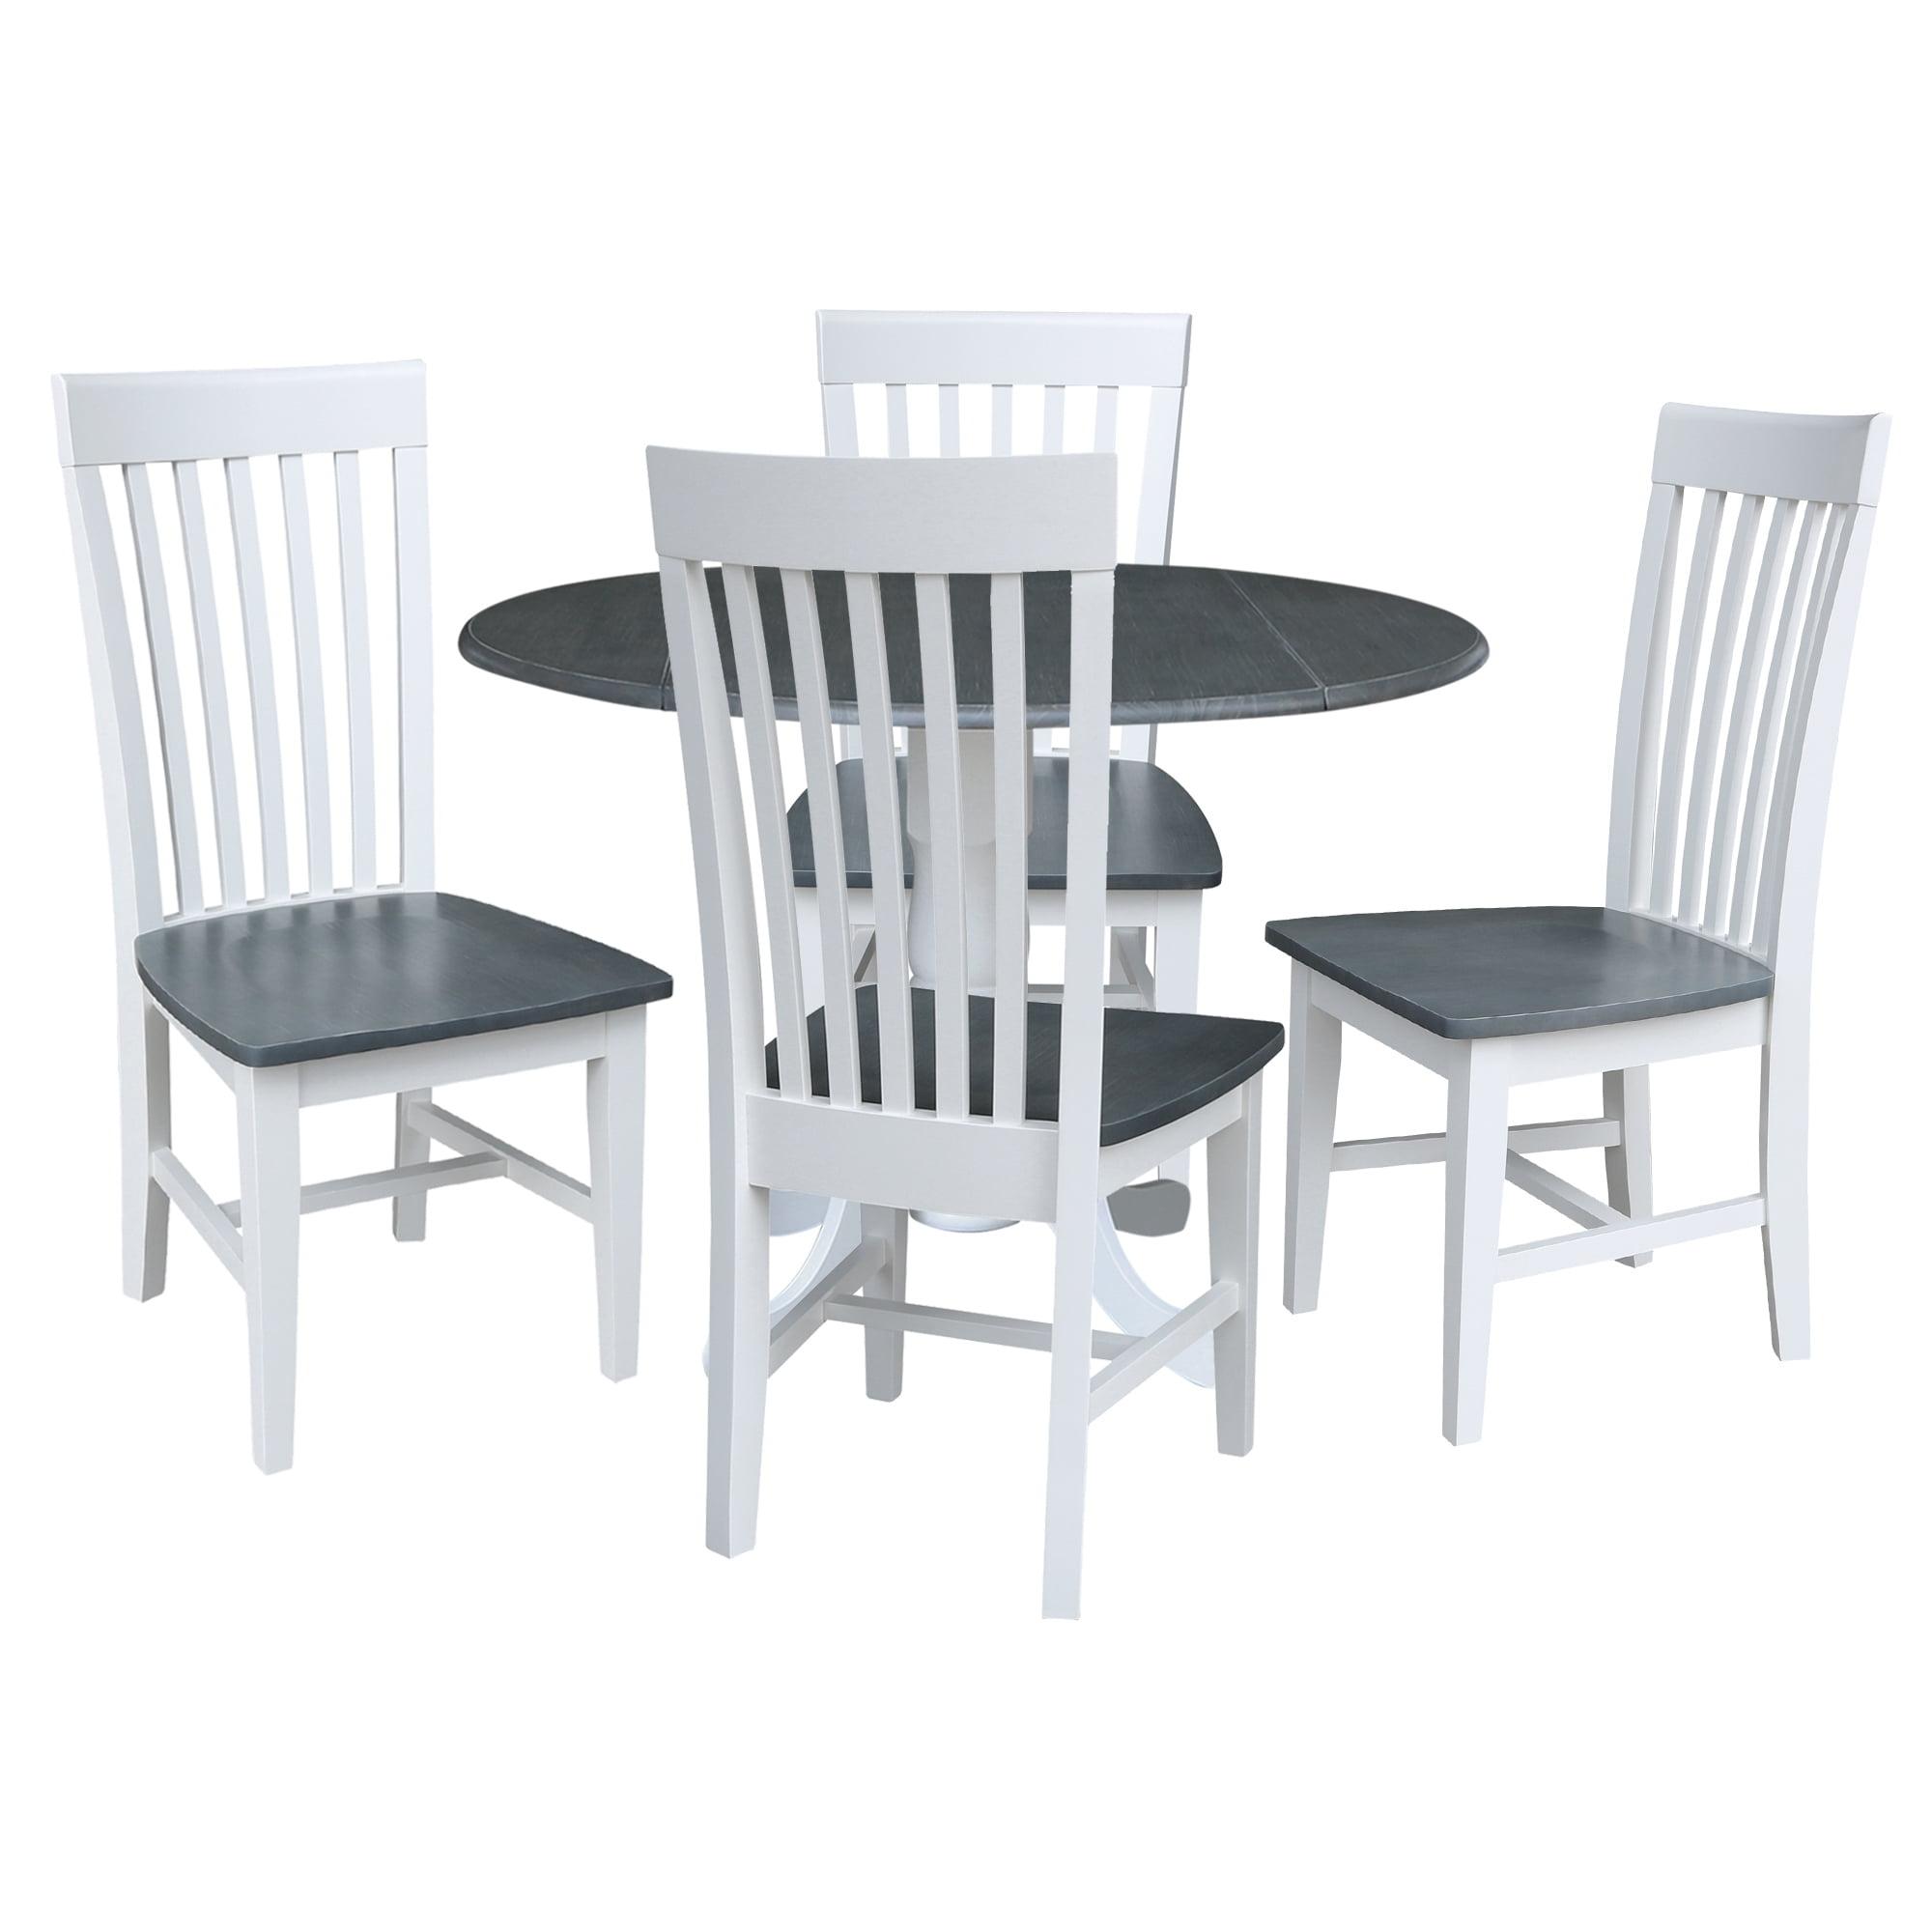 Heather Gray and White Drop Leaf Dining Set with 4 Slat Back Chairs